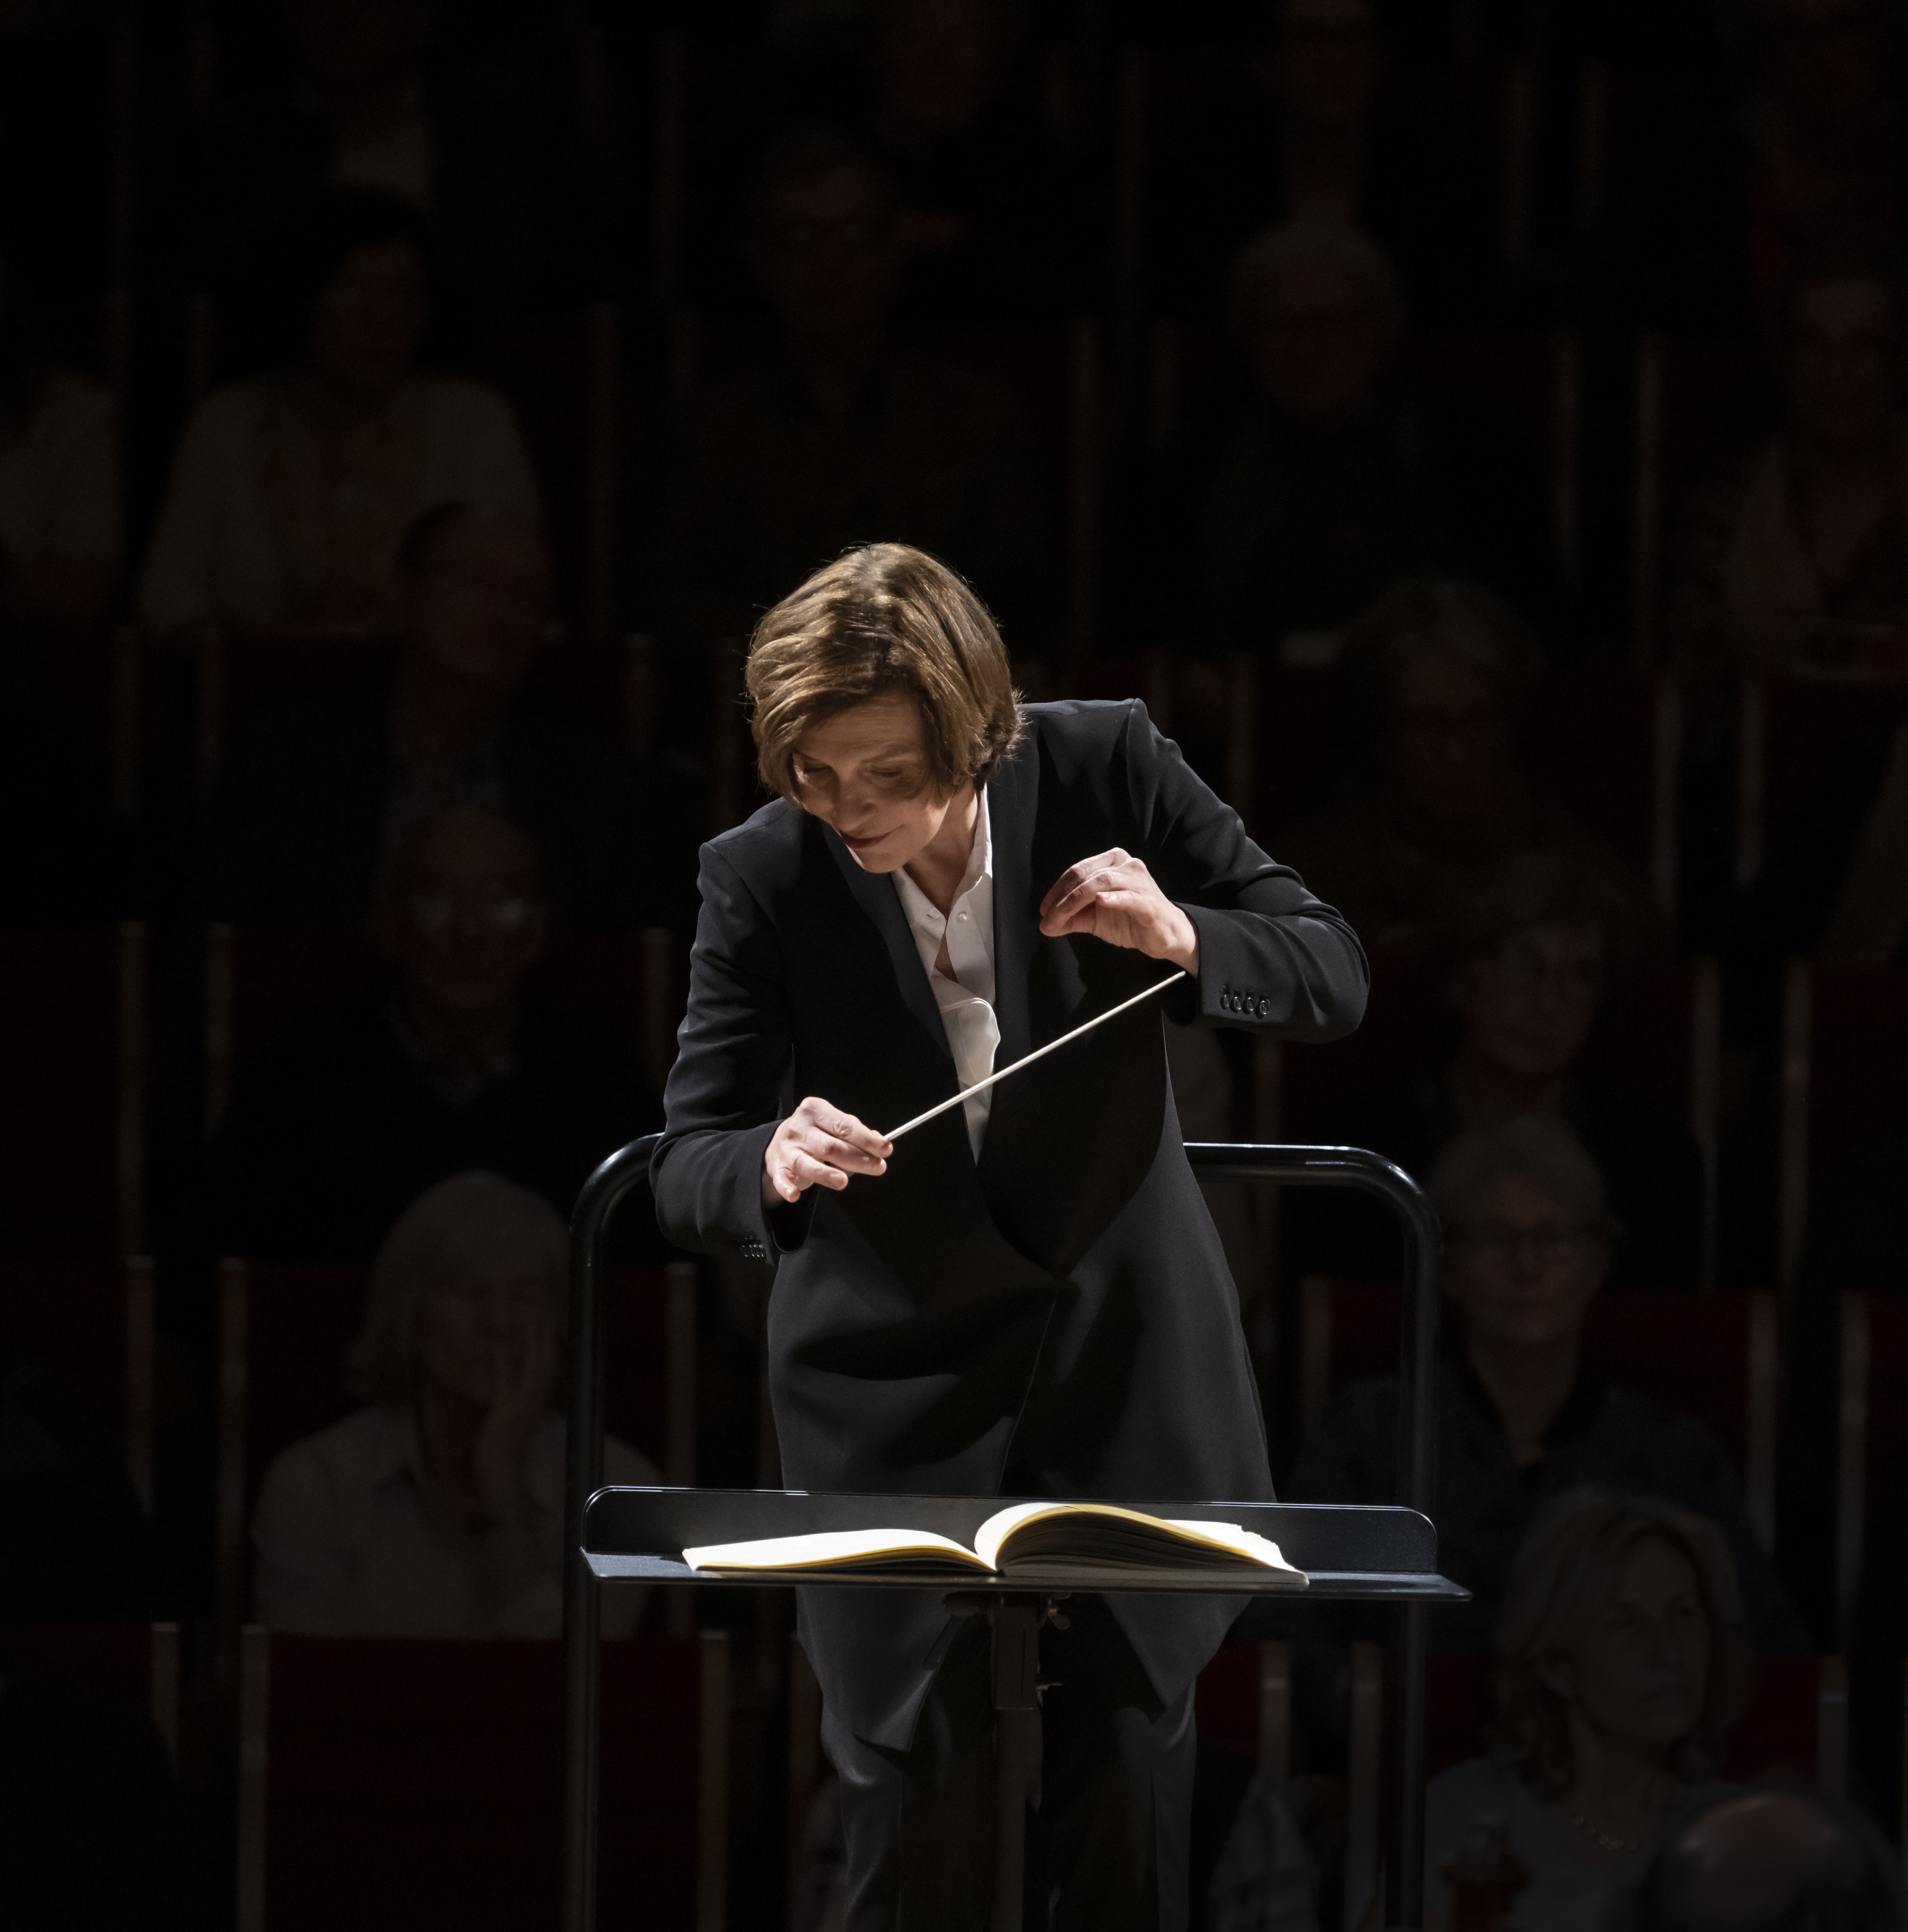 Laurence Equilbey, conductor and founder of the Insula orchestra and Accentus choir, which performed an an all-Beethoven concert as part of the 2023 Hong Kong Arts Festival. Photo: Hong Kong Arts Festival